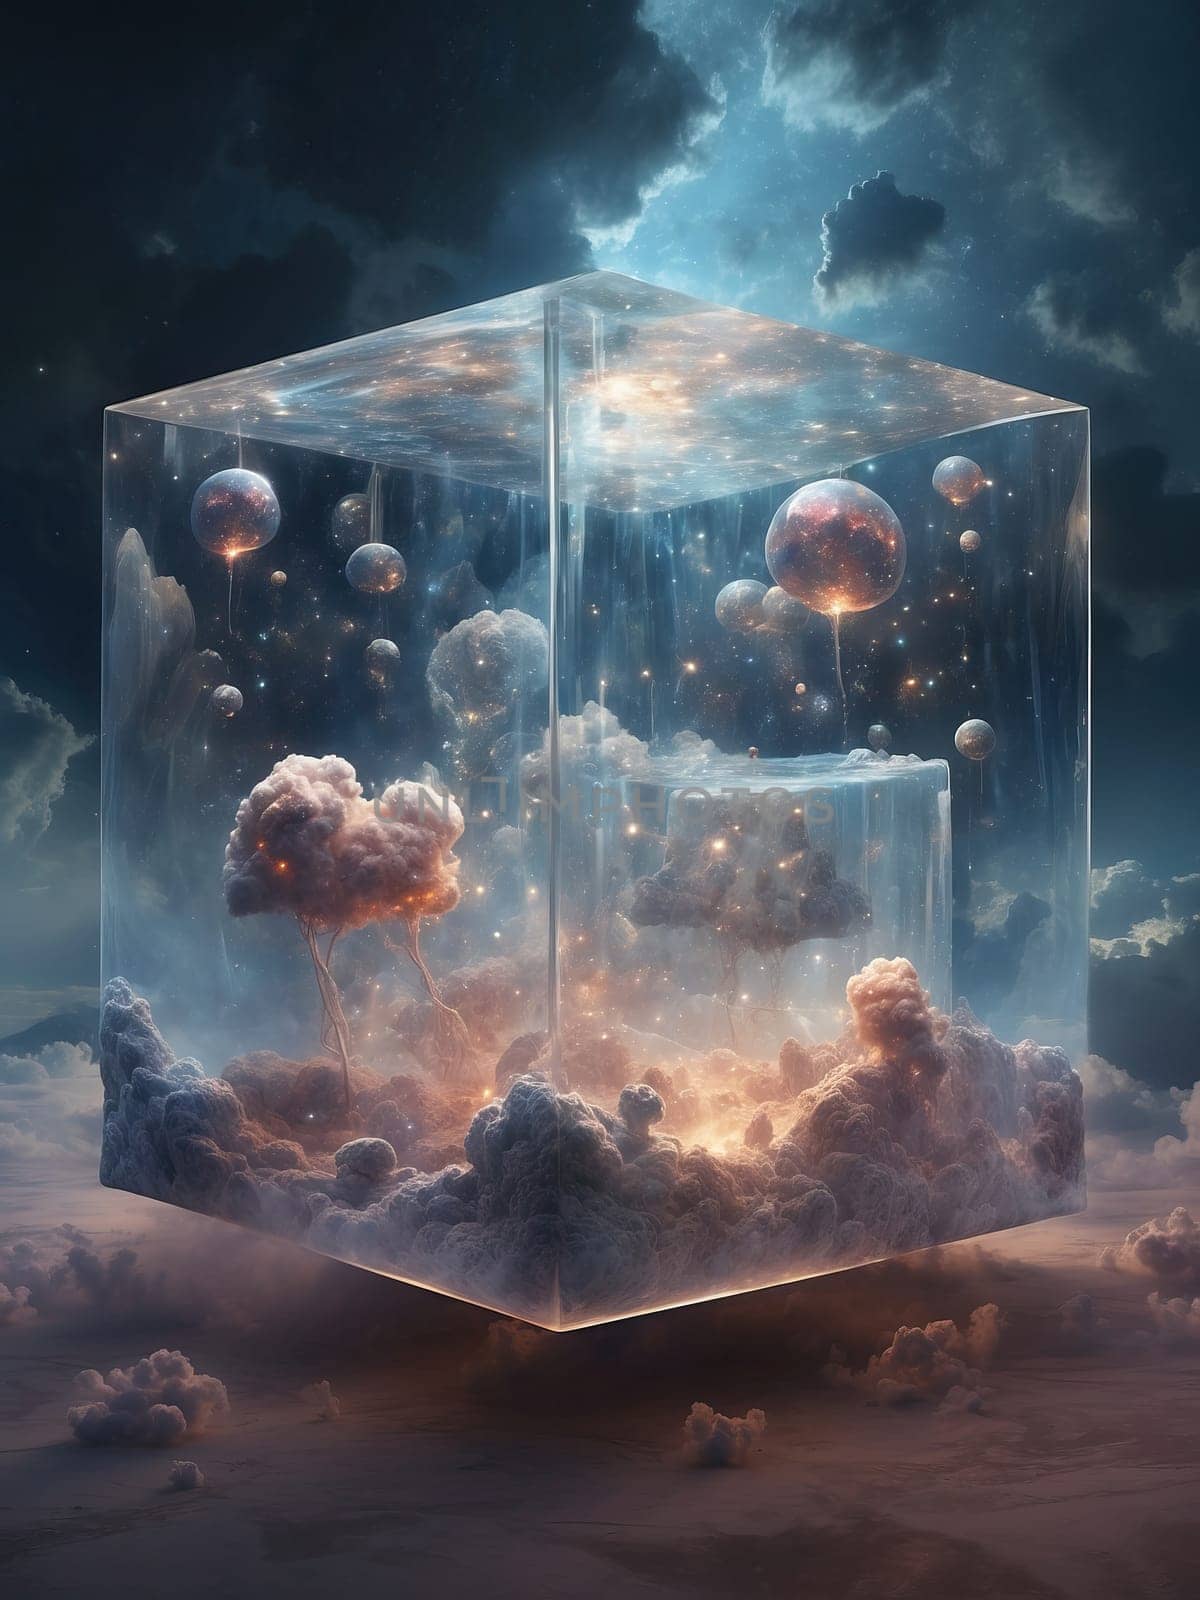 Fantastic illustration in a transparent cube by applesstock